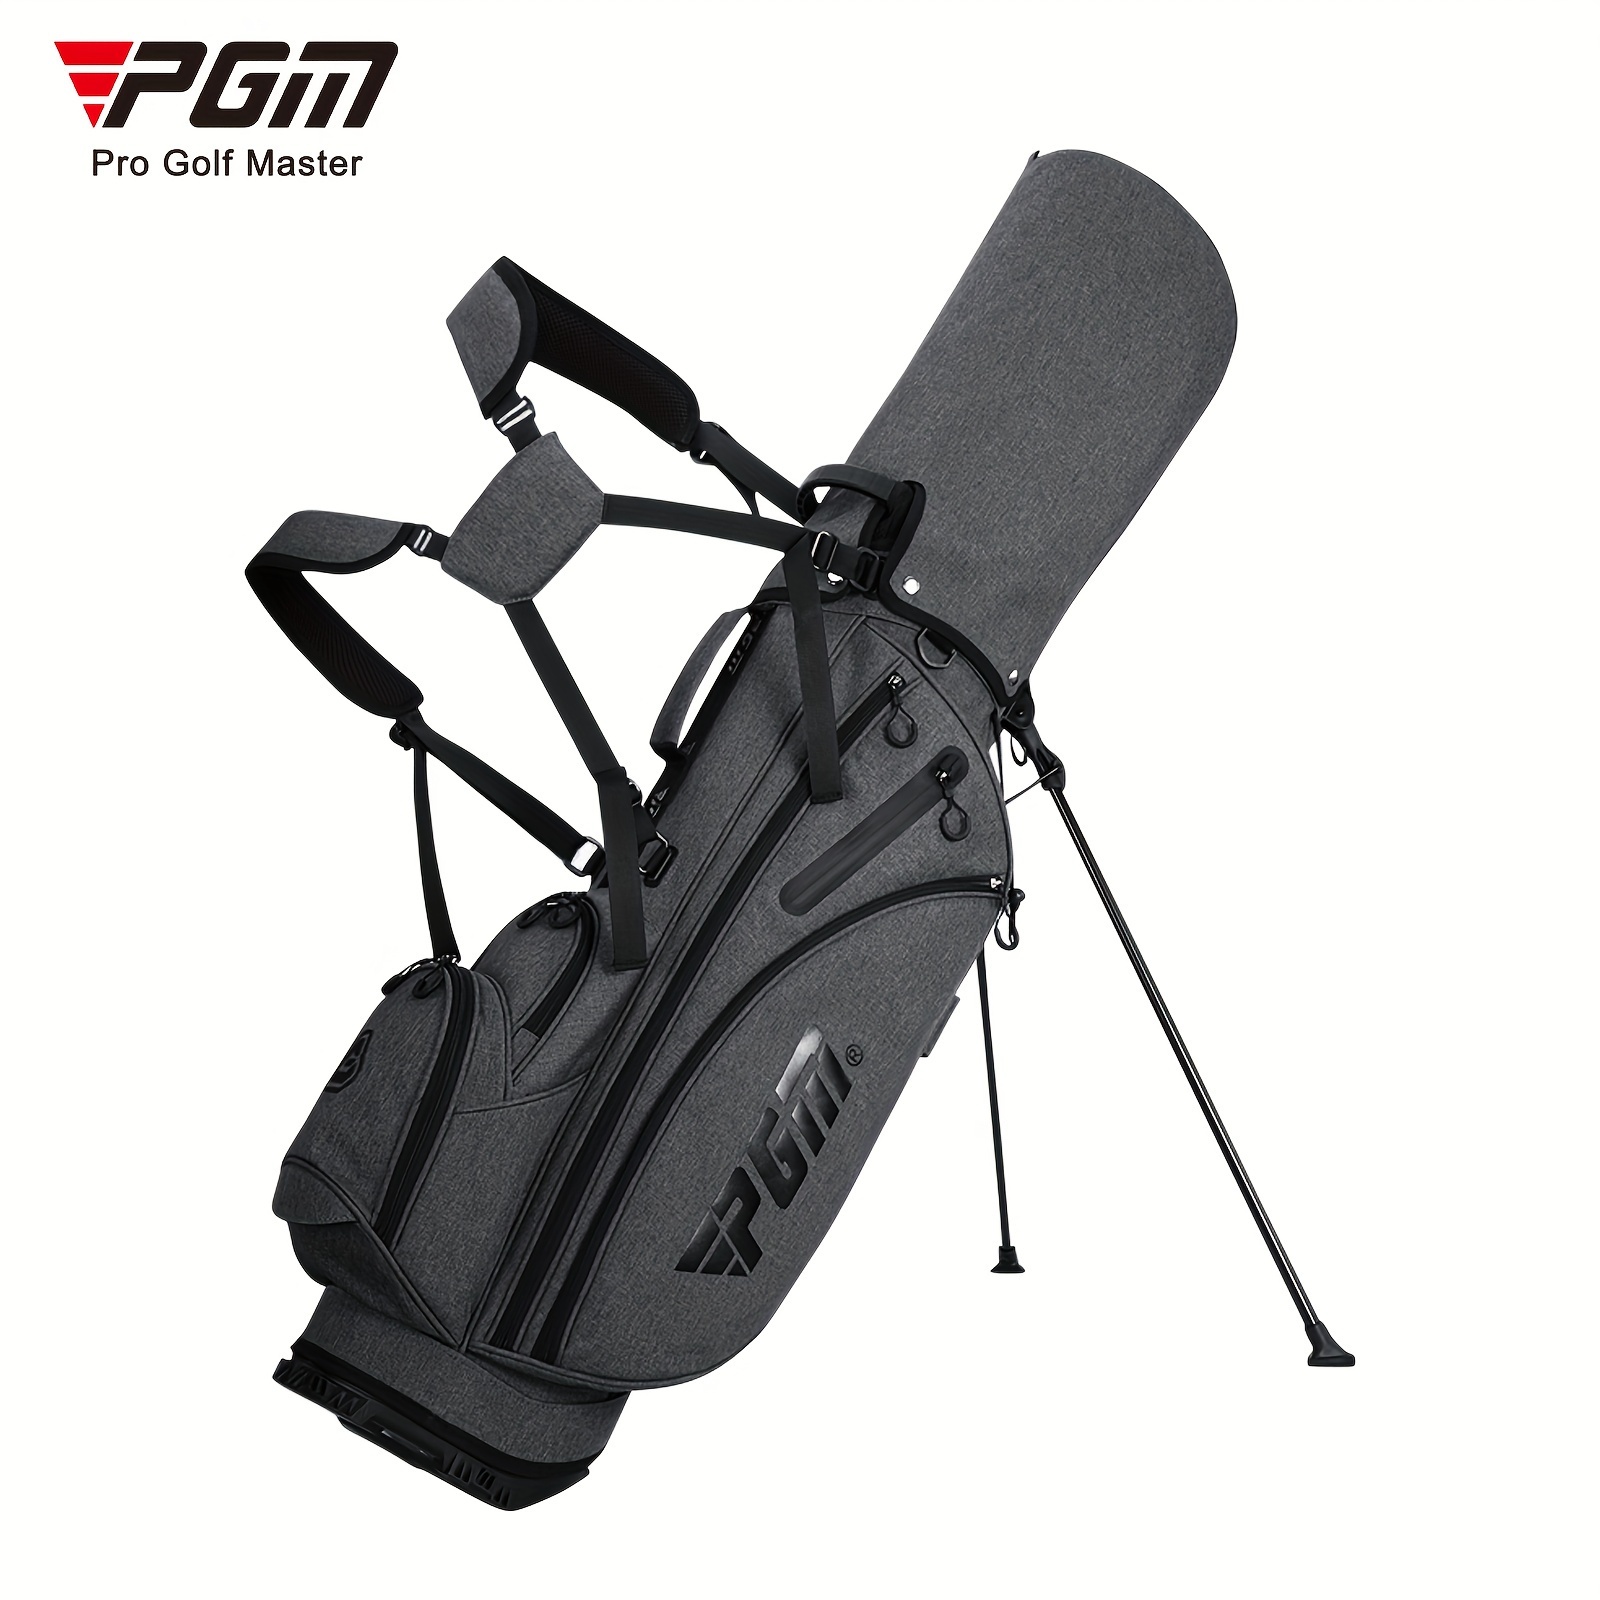 

Pgm Golf Bag Stand Bag For Men With Insulated Pvc Coating, Portable Golf Club Bag With Thermal Bag